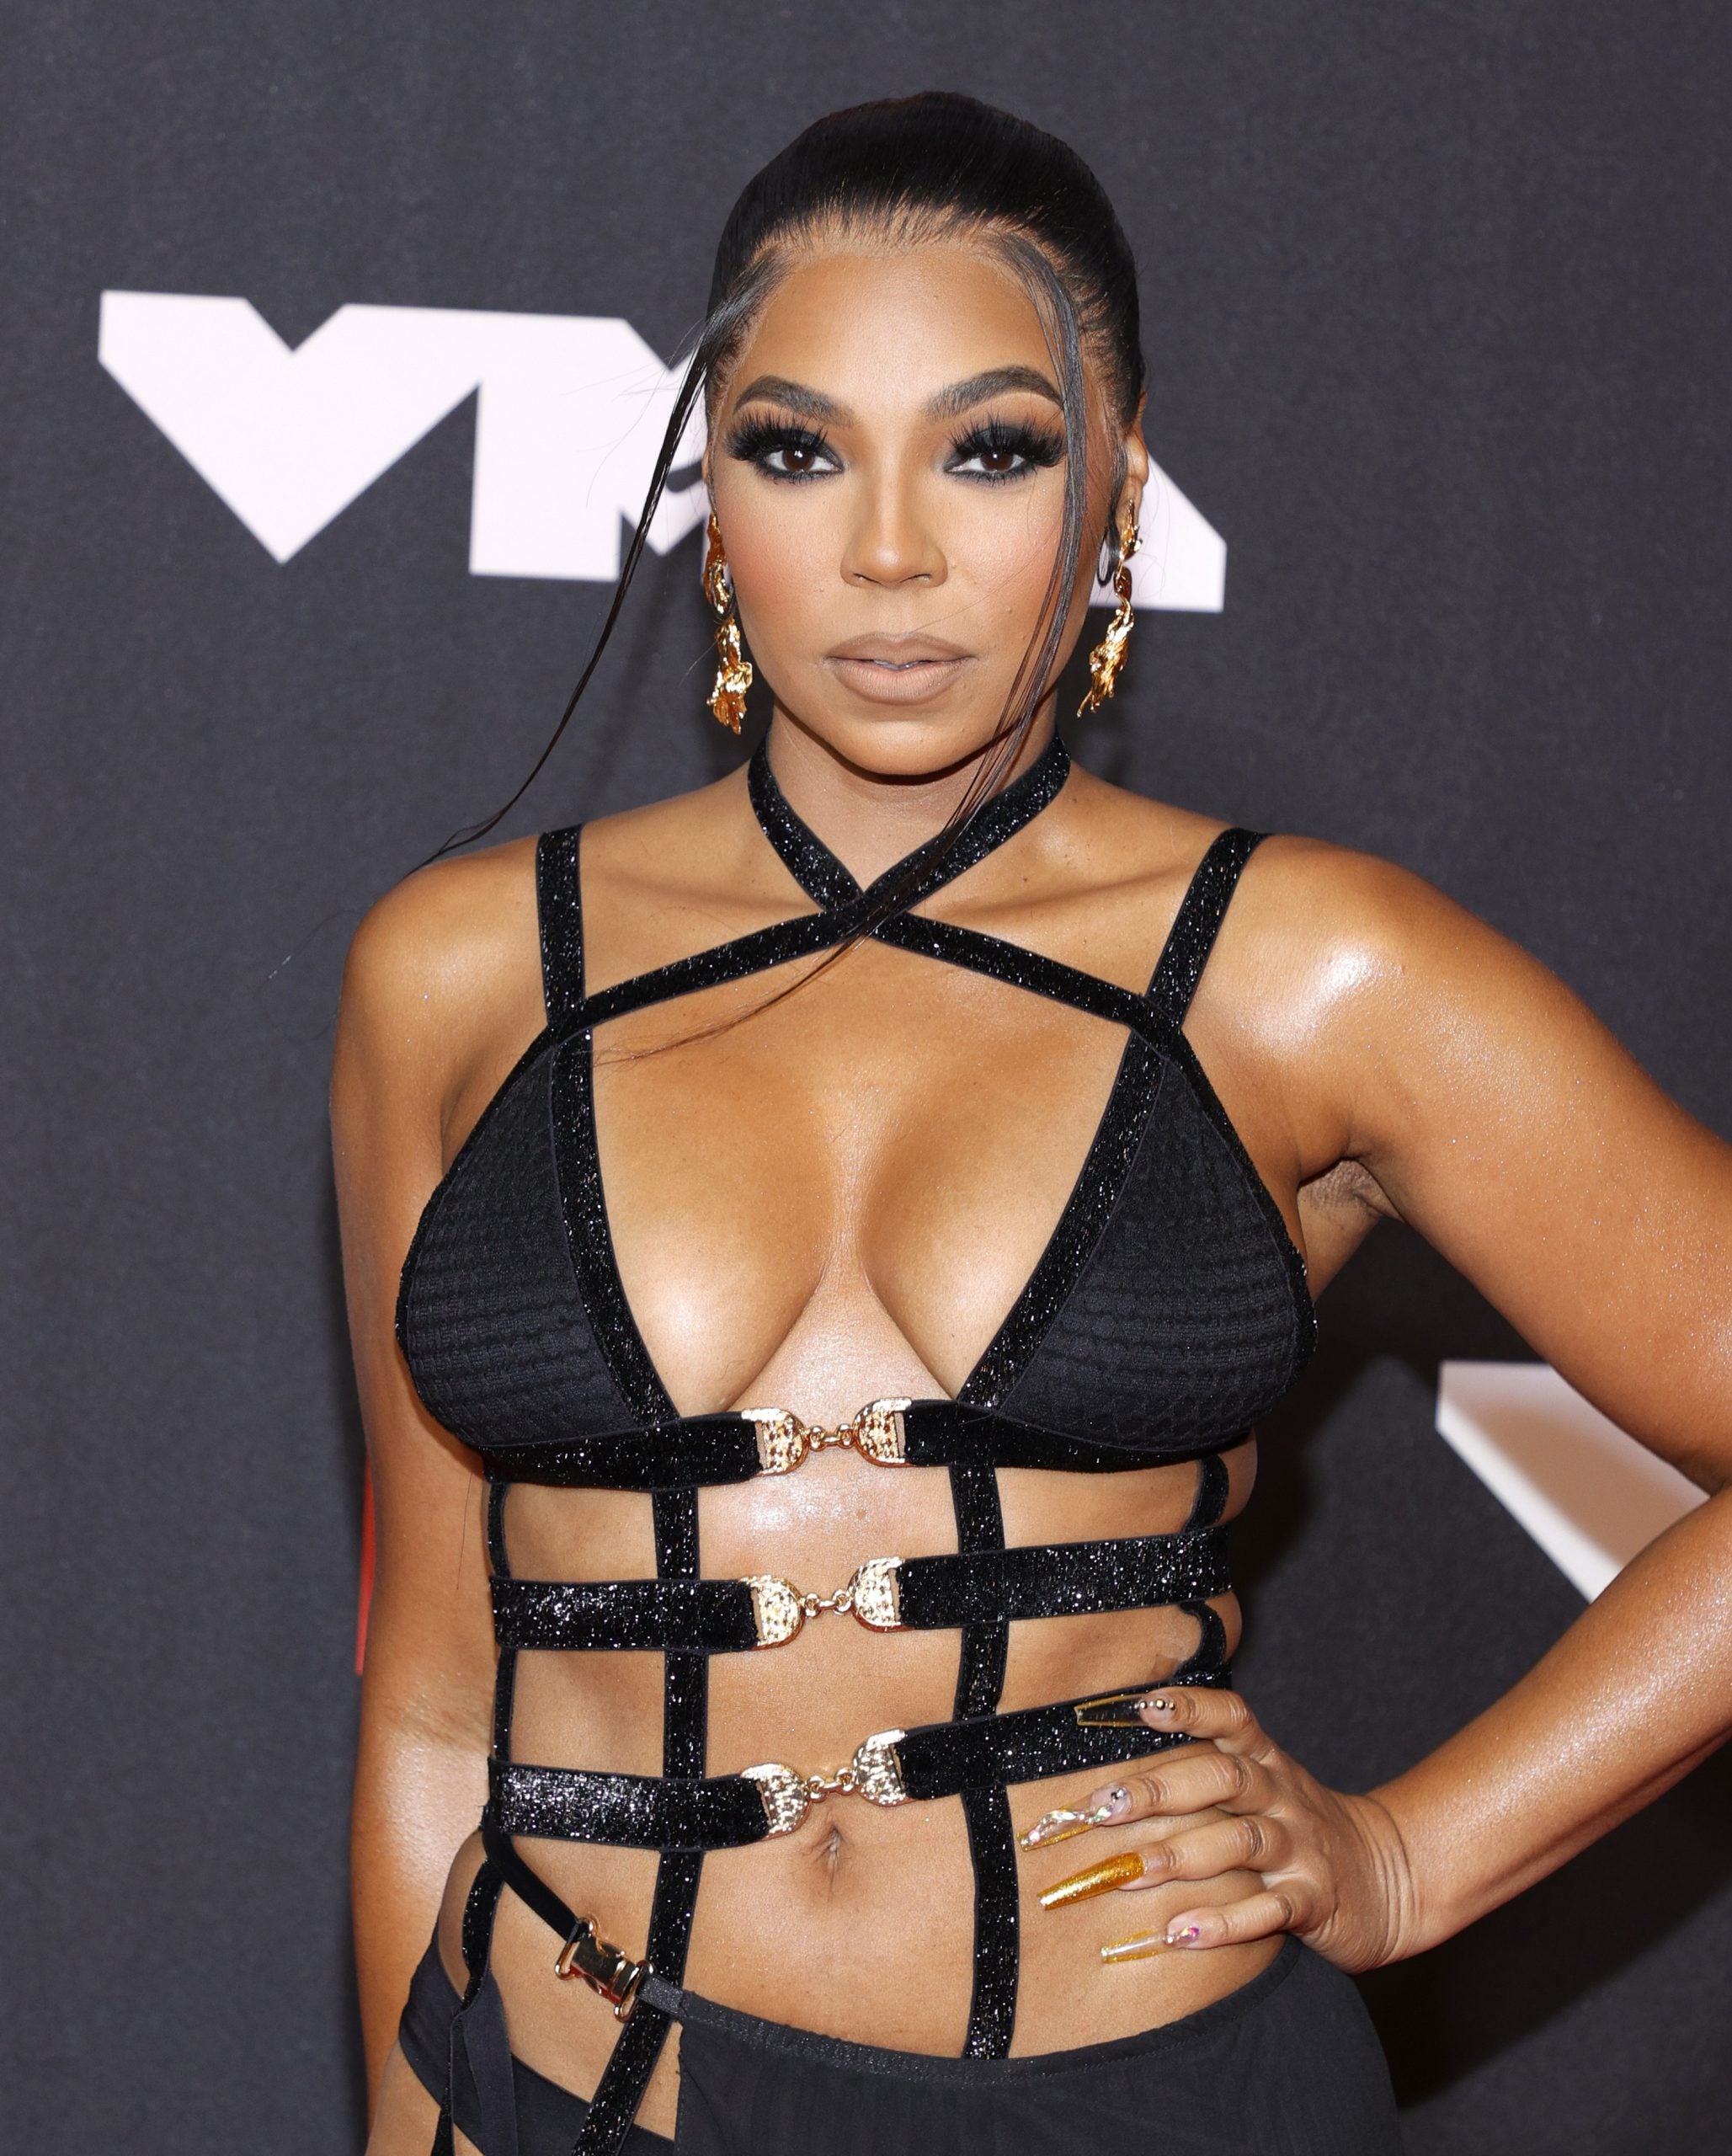 A Look Back At 43 Of Ashanti’s Most Iconic Beauty Looks